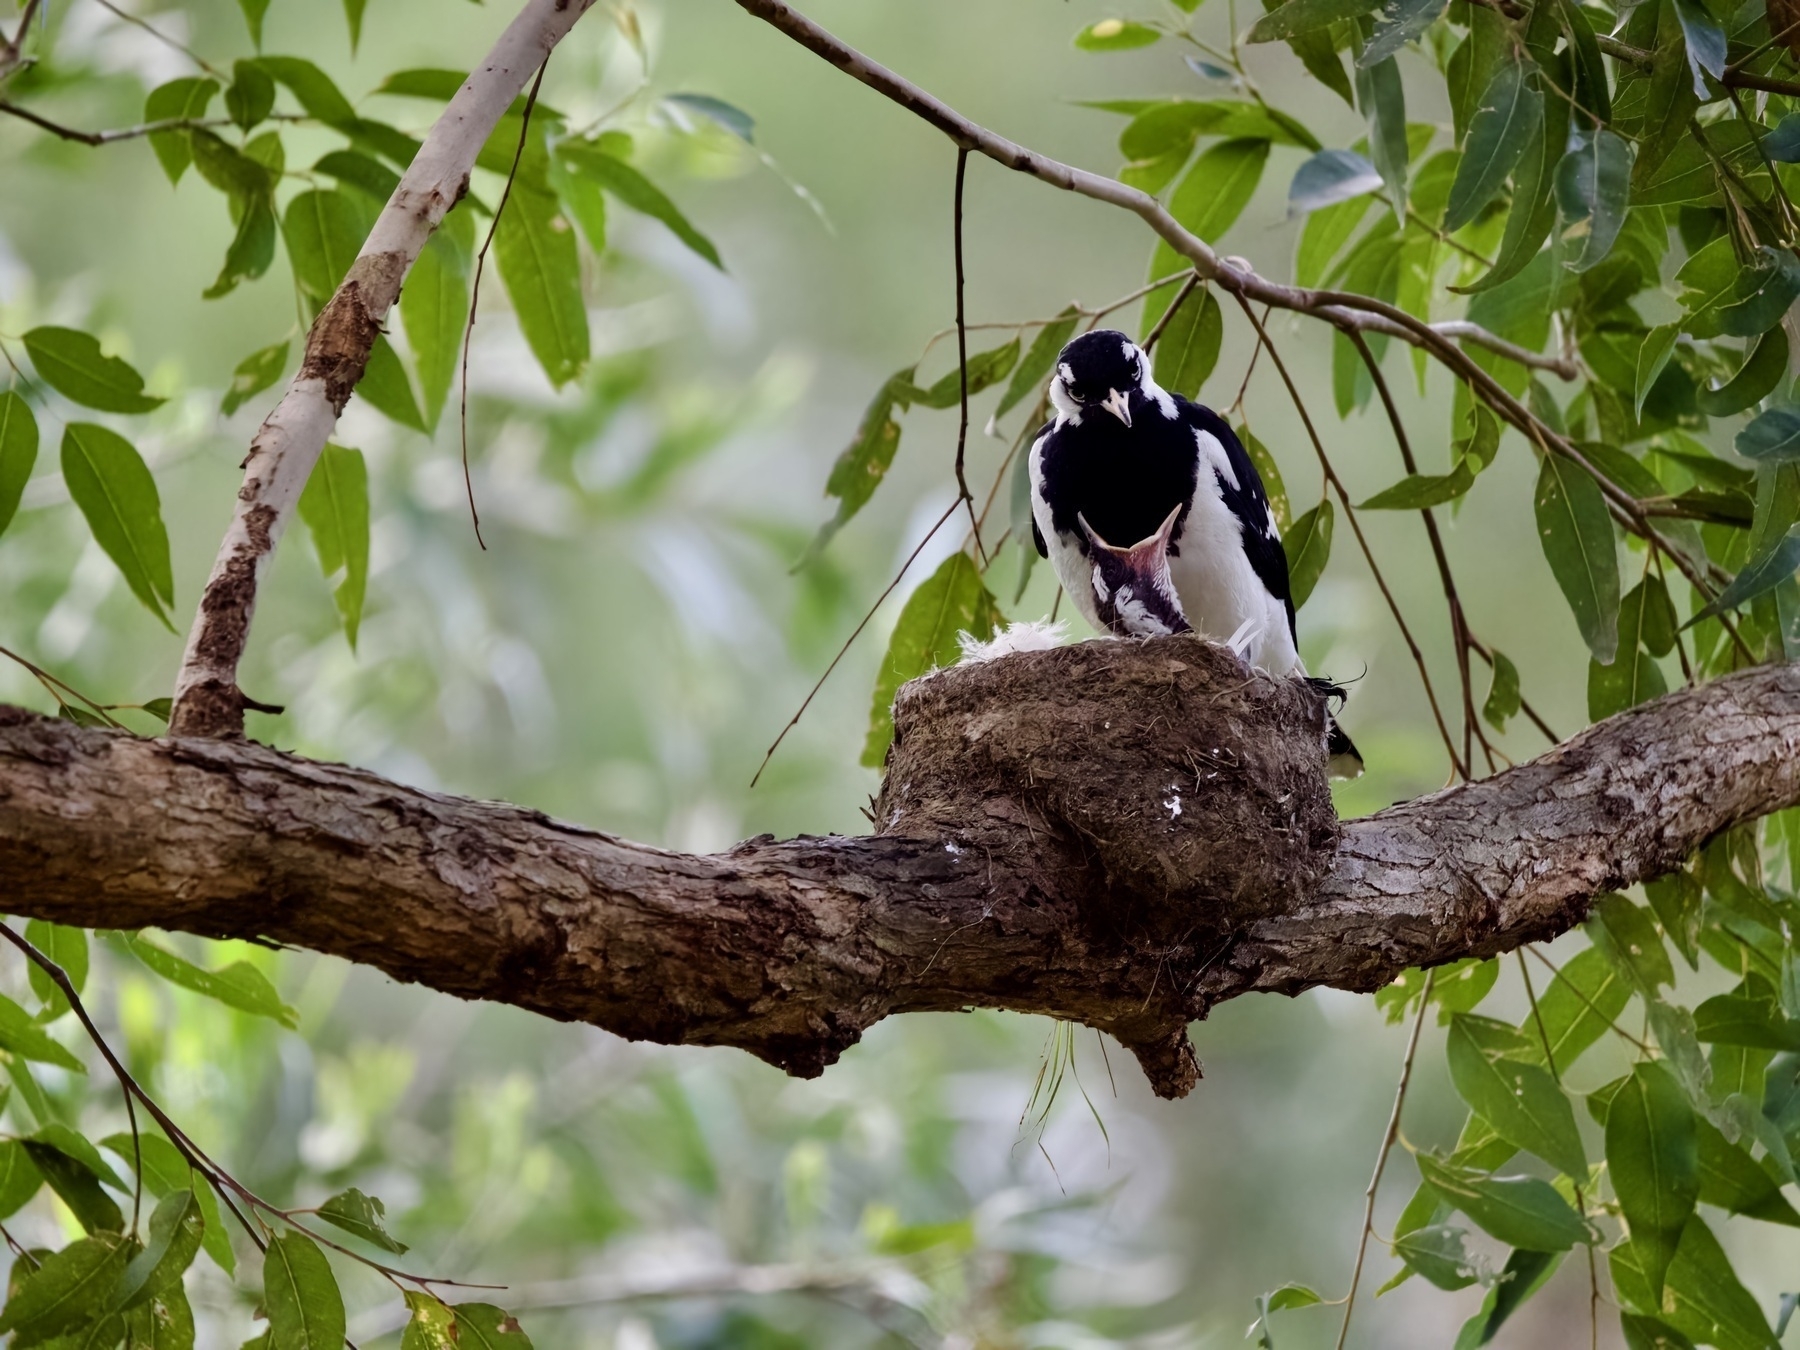 A peewee/magpie lark parent sits in a nest, looking down towards its chick, which opens its mouth for food.